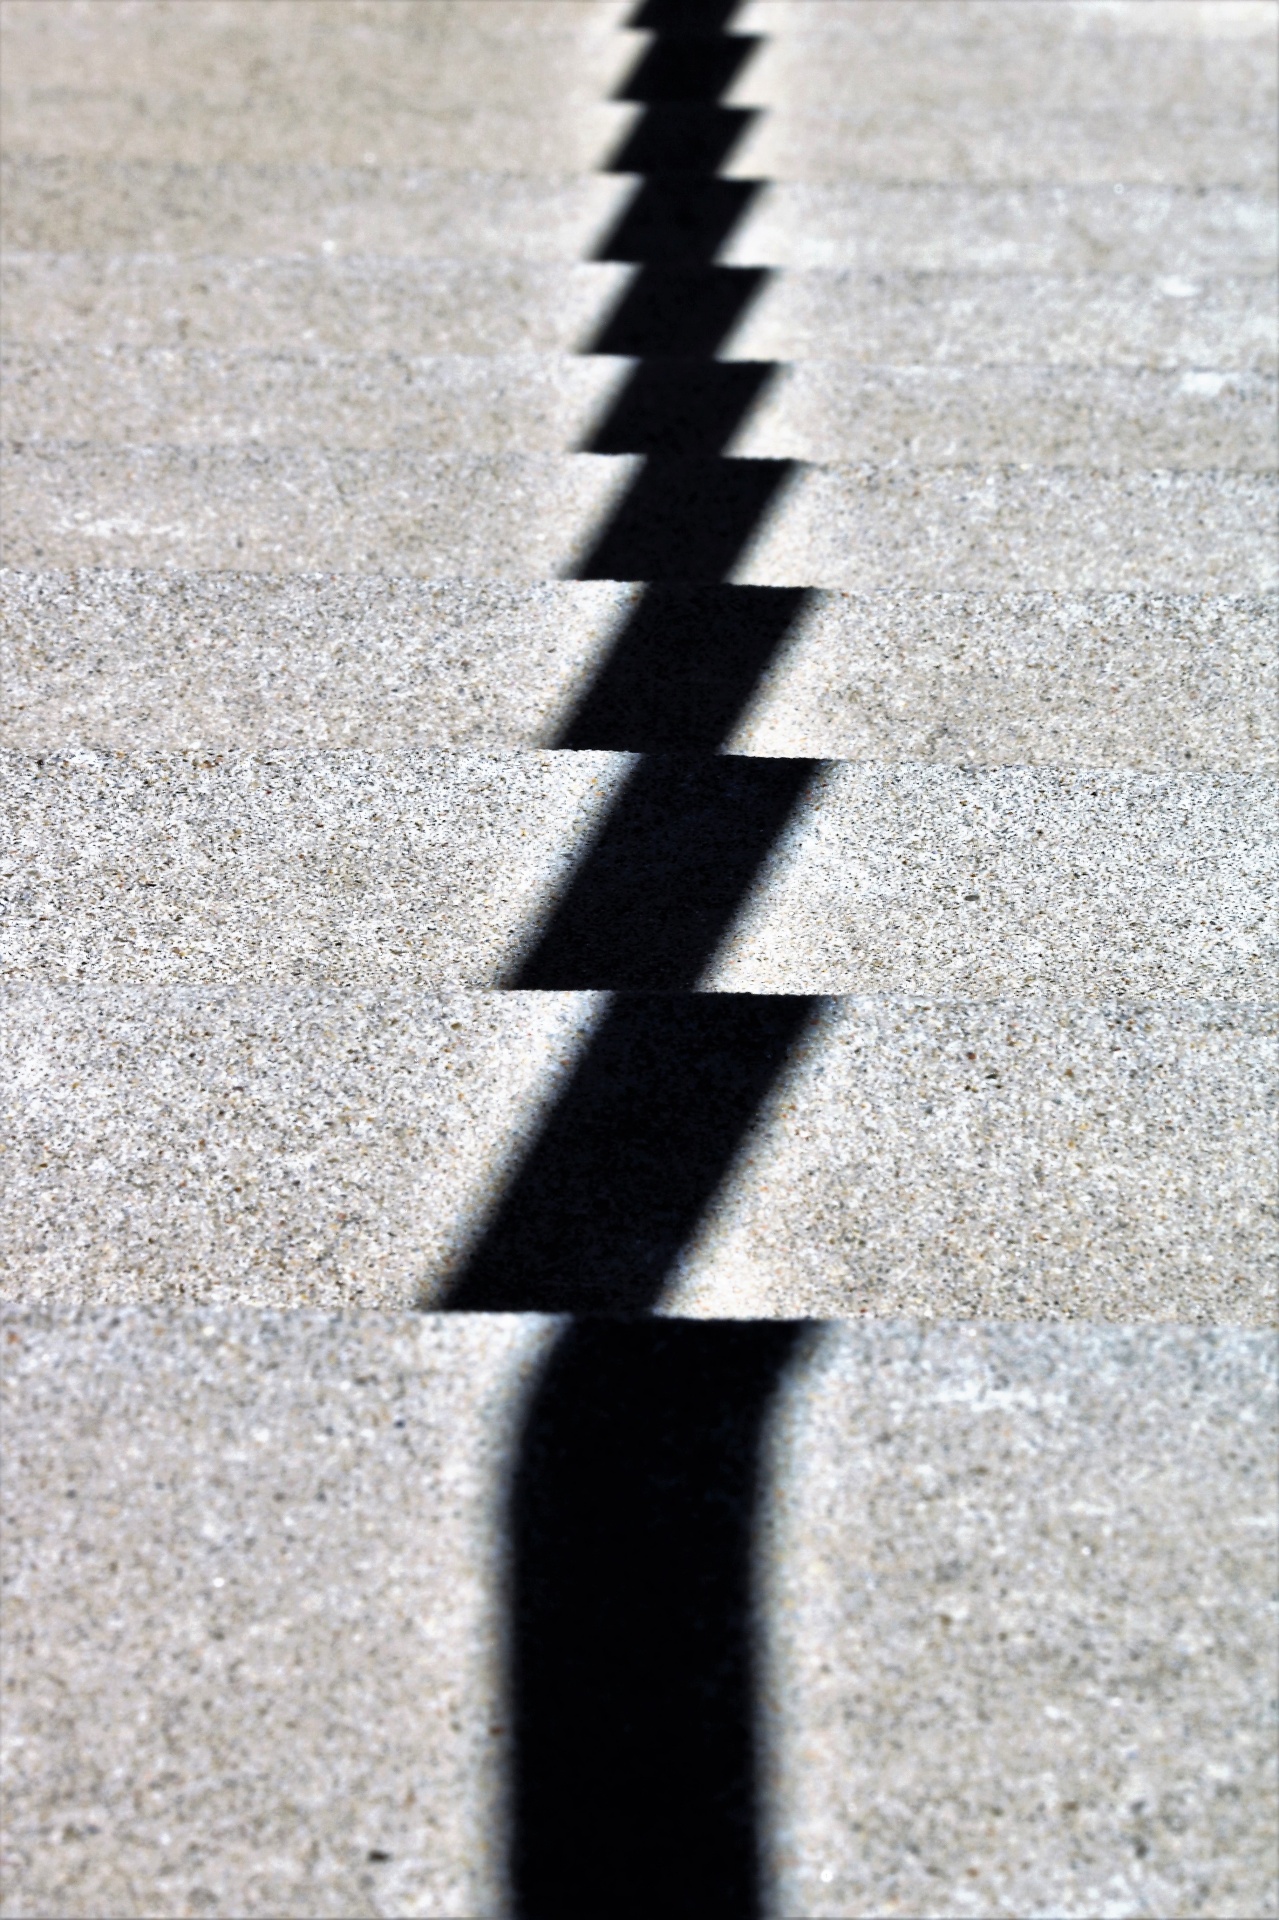 Abstract Shadows On Stairs